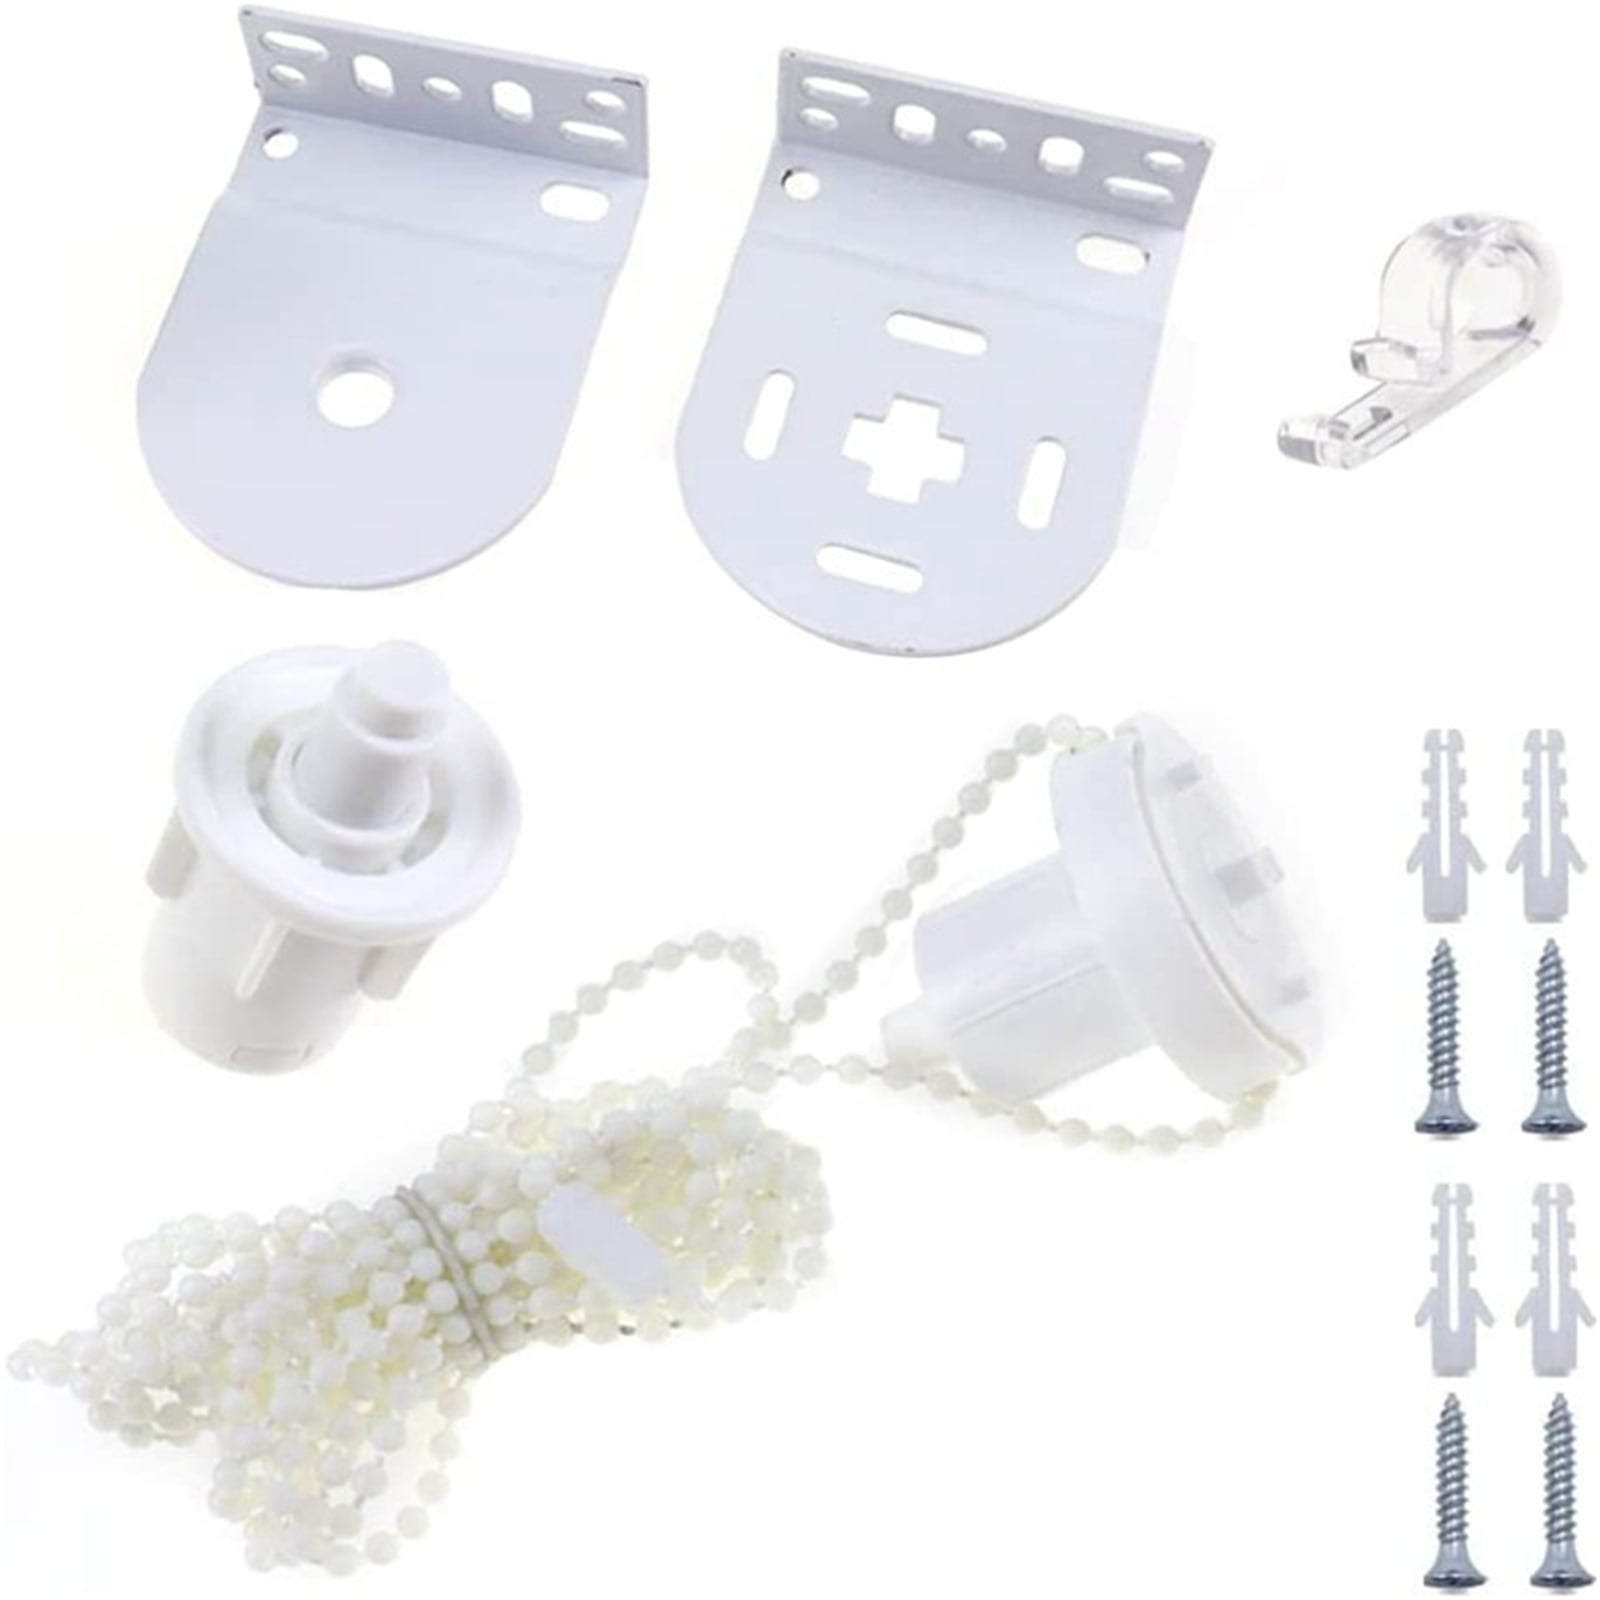 32mm PROFFESIONAL HEAVY DUTY WHITE ROLLER BLIND REPAIR KIT FOR SPARES OR PARTS 